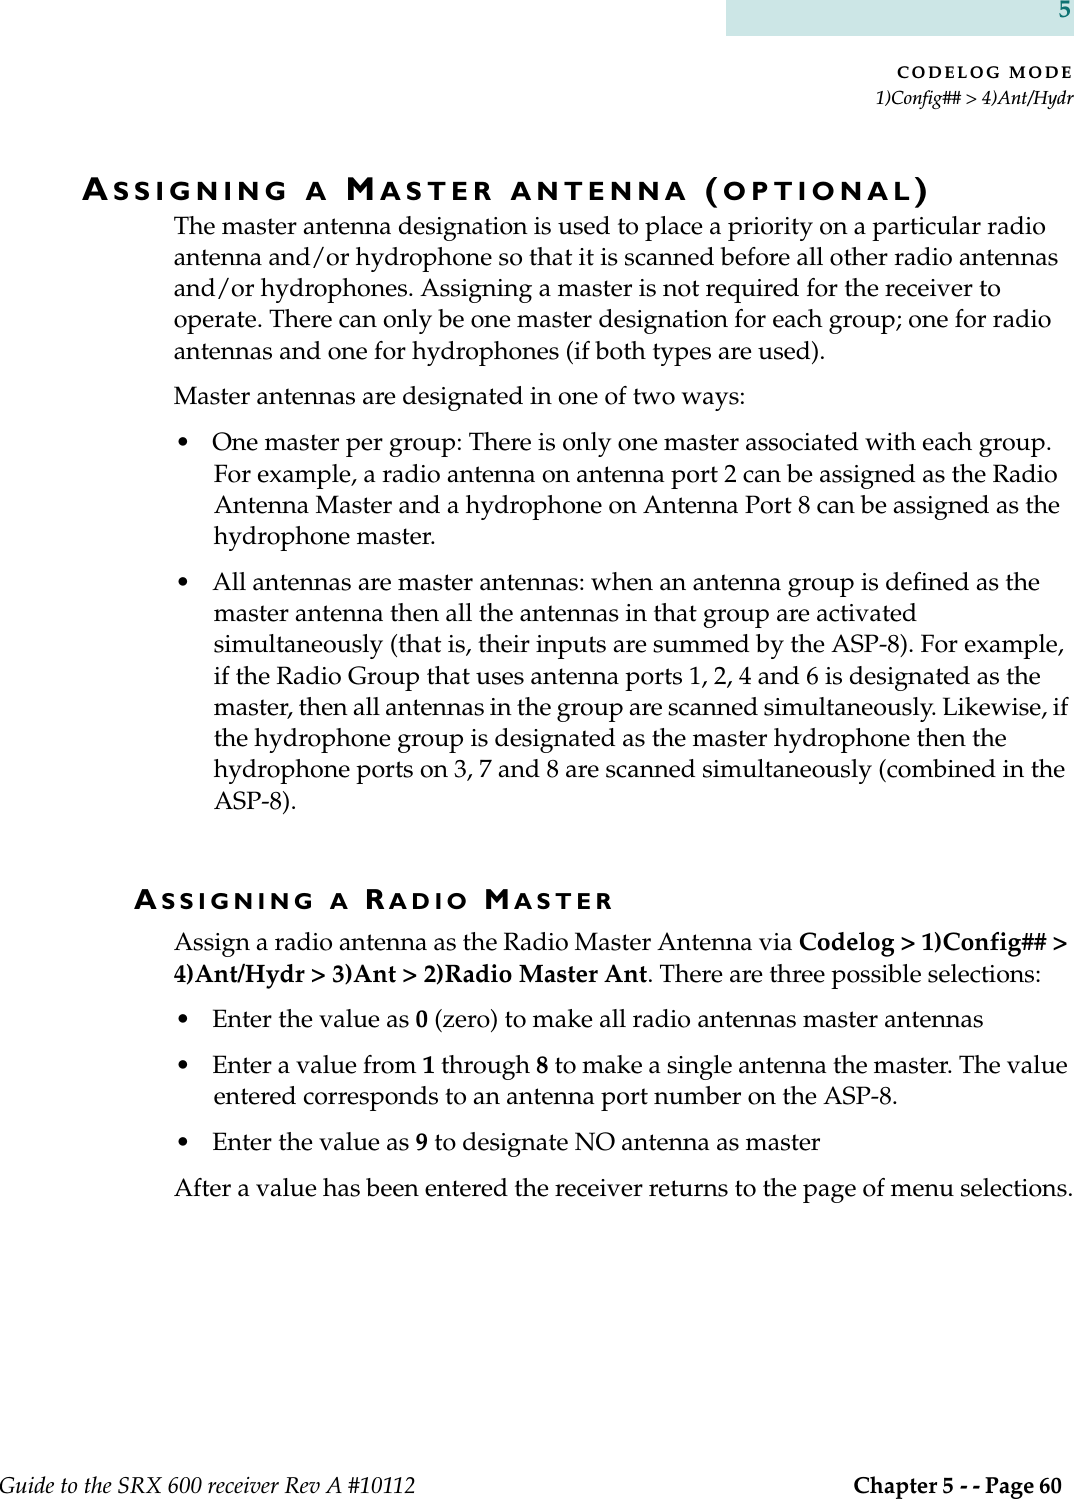 CODELOG MODE1)Config## &gt; 4)Ant/HydrGuide to the SRX 600 receiver Rev A #10112  Chapter 5 - - Page 60 5ASSIGNING A MASTER ANTENNA (OPTIONAL)The master antenna designation is used to place a priority on a particular radio antenna and/or hydrophone so that it is scanned before all other radio antennas and/or hydrophones. Assigning a master is not required for the receiver to operate. There can only be one master designation for each group; one for radio antennas and one for hydrophones (if both types are used).Master antennas are designated in one of two ways:• One master per group: There is only one master associated with each group. For example, a radio antenna on antenna port 2 can be assigned as the Radio Antenna Master and a hydrophone on Antenna Port 8 can be assigned as the hydrophone master. • All antennas are master antennas: when an antenna group is defined as the master antenna then all the antennas in that group are activated simultaneously (that is, their inputs are summed by the ASP-8). For example, if the Radio Group that uses antenna ports 1, 2, 4 and 6 is designated as the master, then all antennas in the group are scanned simultaneously. Likewise, if the hydrophone group is designated as the master hydrophone then the hydrophone ports on 3, 7 and 8 are scanned simultaneously (combined in the ASP-8). ASSIGNING A RADIO MASTERAssign a radio antenna as the Radio Master Antenna via Codelog &gt; 1)Config## &gt; 4)Ant/Hydr &gt; 3)Ant &gt; 2)Radio Master Ant. There are three possible selections:• Enter the value as 0 (zero) to make all radio antennas master antennas• Enter a value from 1 through 8 to make a single antenna the master. The value entered corresponds to an antenna port number on the ASP-8.• Enter the value as 9 to designate NO antenna as masterAfter a value has been entered the receiver returns to the page of menu selections.